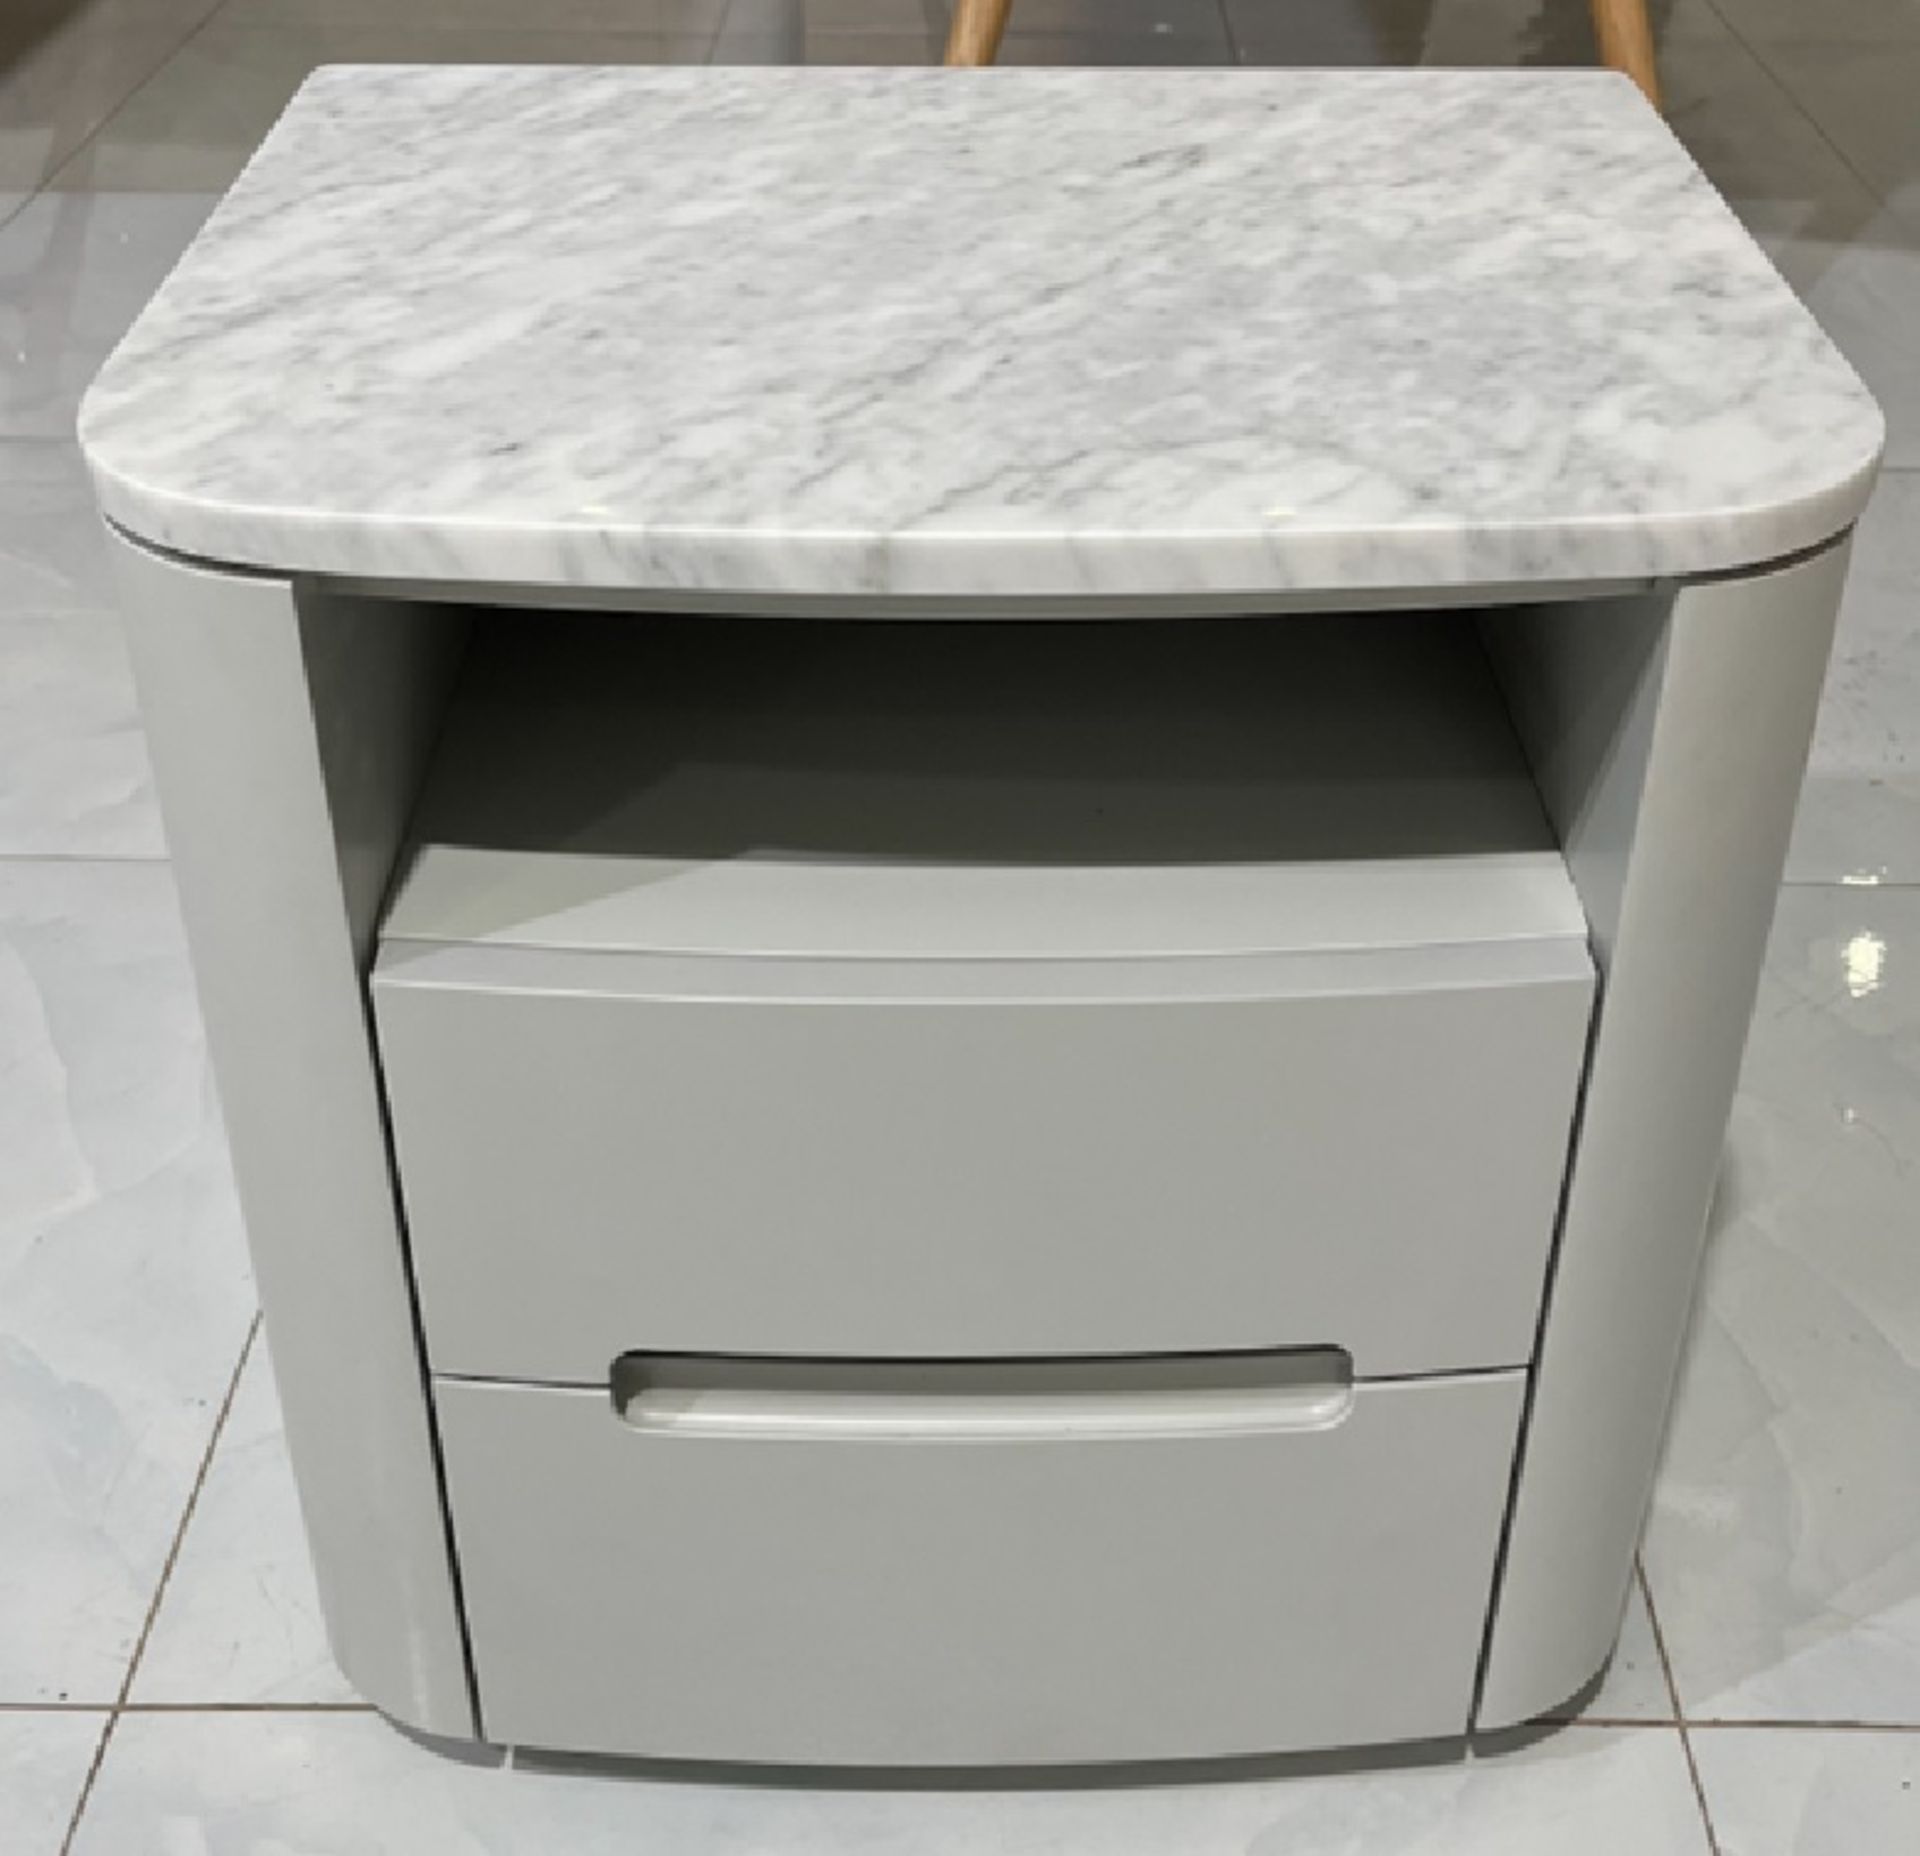 Florence Bedside Cabinet A stunning bedside cabinet with a top of Italian polished Carrara Marble,